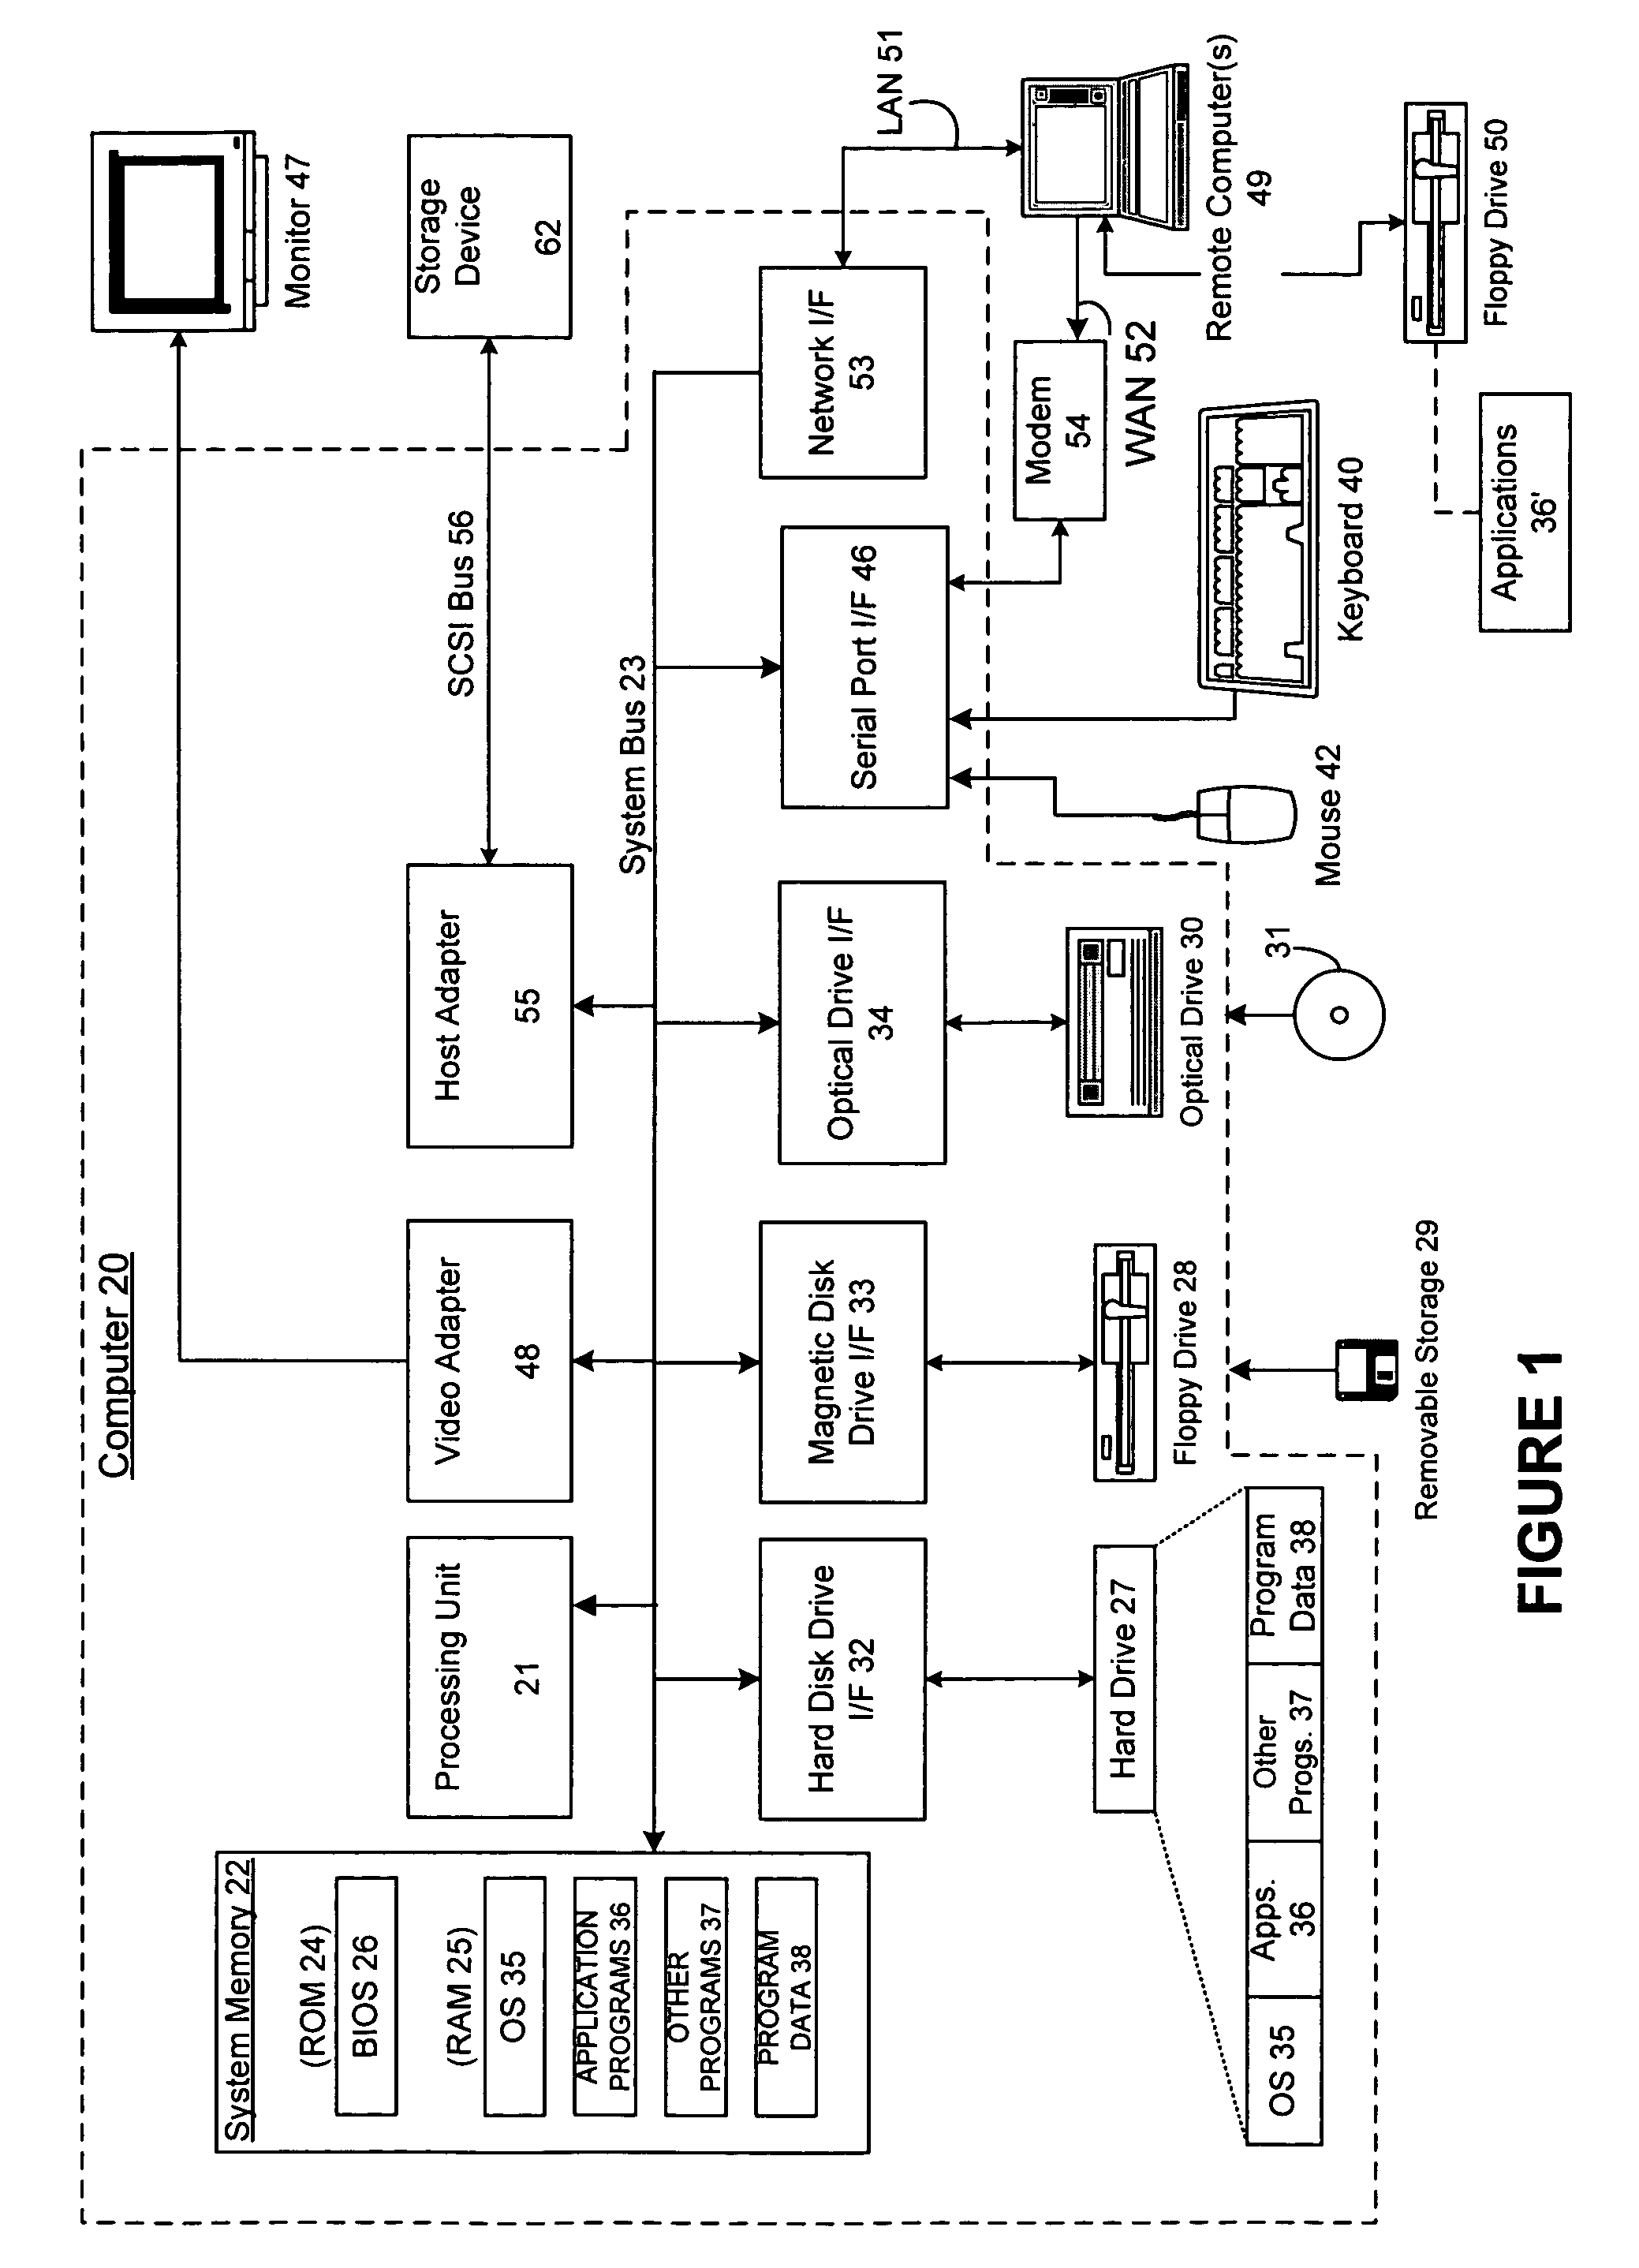 Systems and methods for distributing a workplan for data flow execution based on an arbitrary graph describing the desired data flow